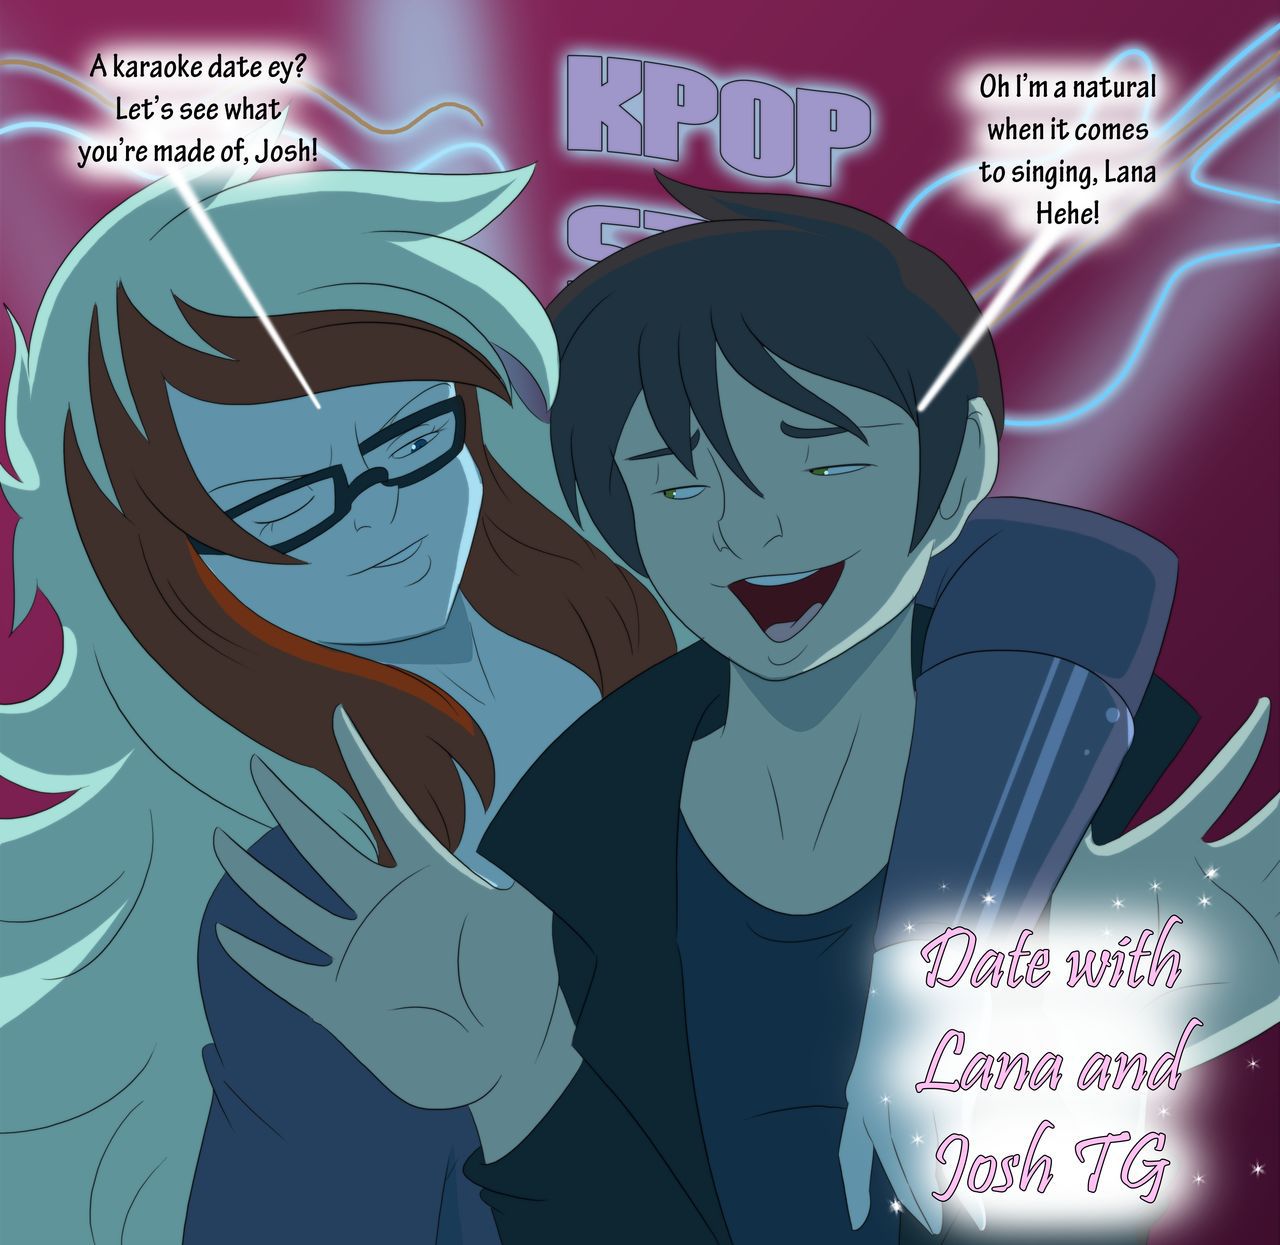 [TFSubmissions] Date with Lana TG - Josh Karaoke Date 1